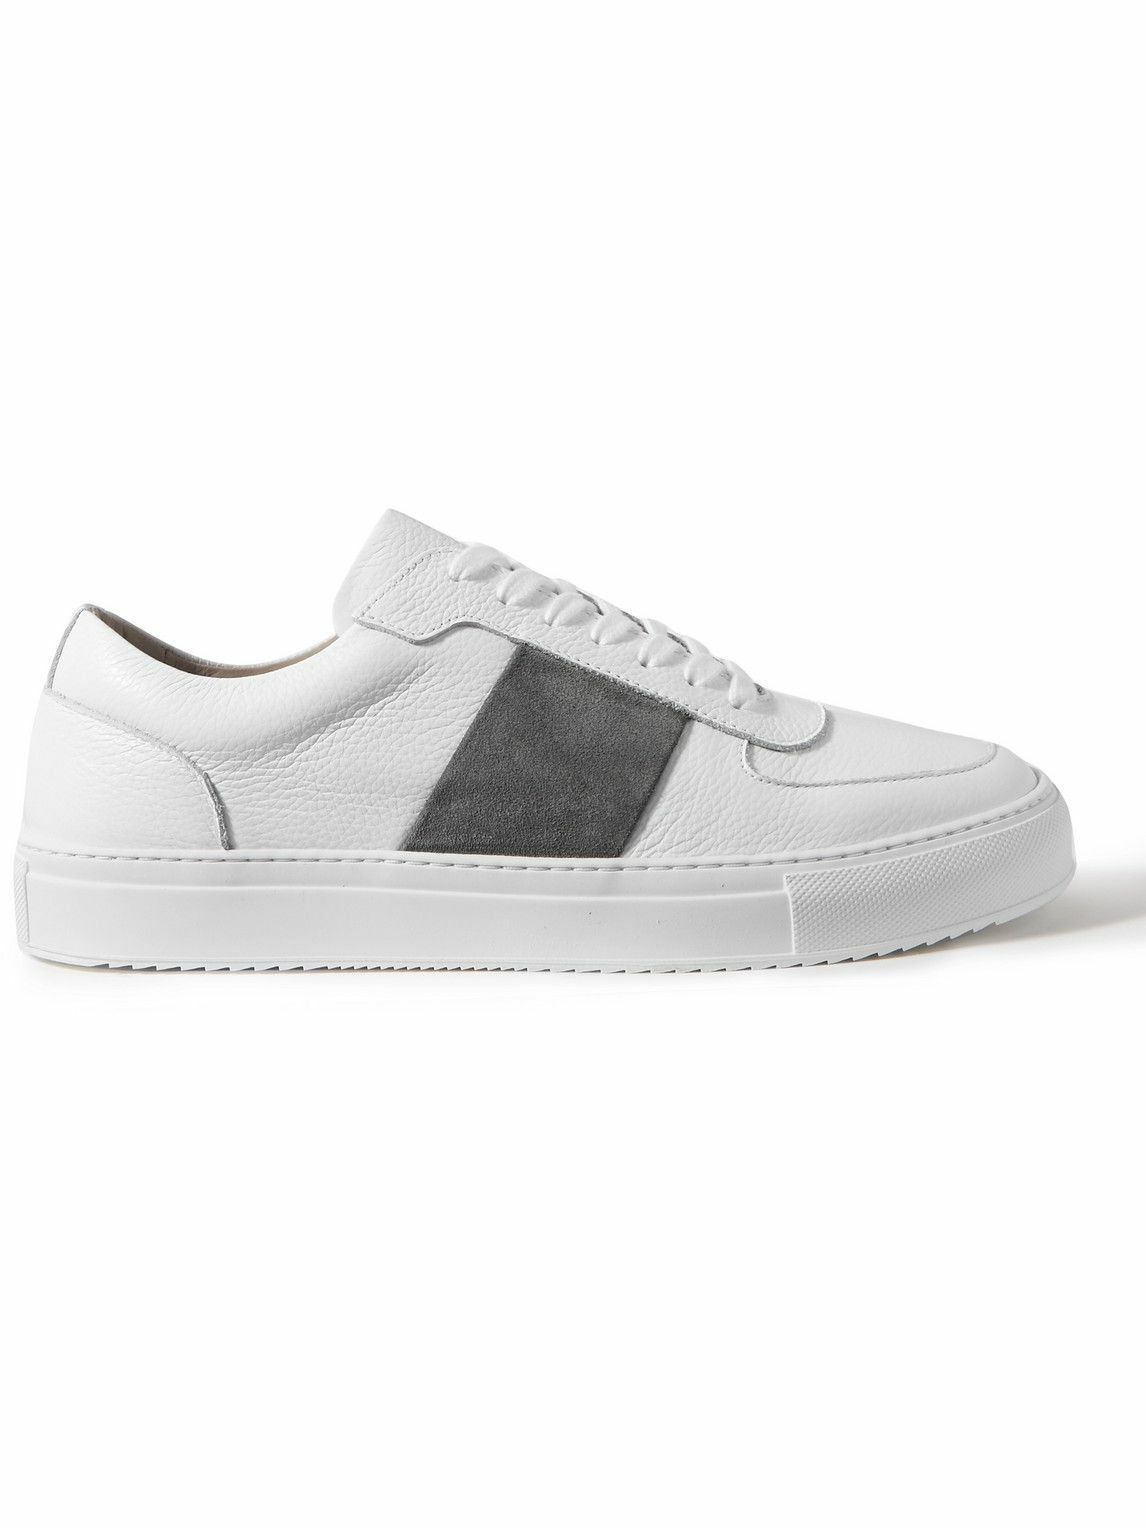 Mr P. - Larry Pebble-Grain Leather and Suede Sneakers - White Mr P.